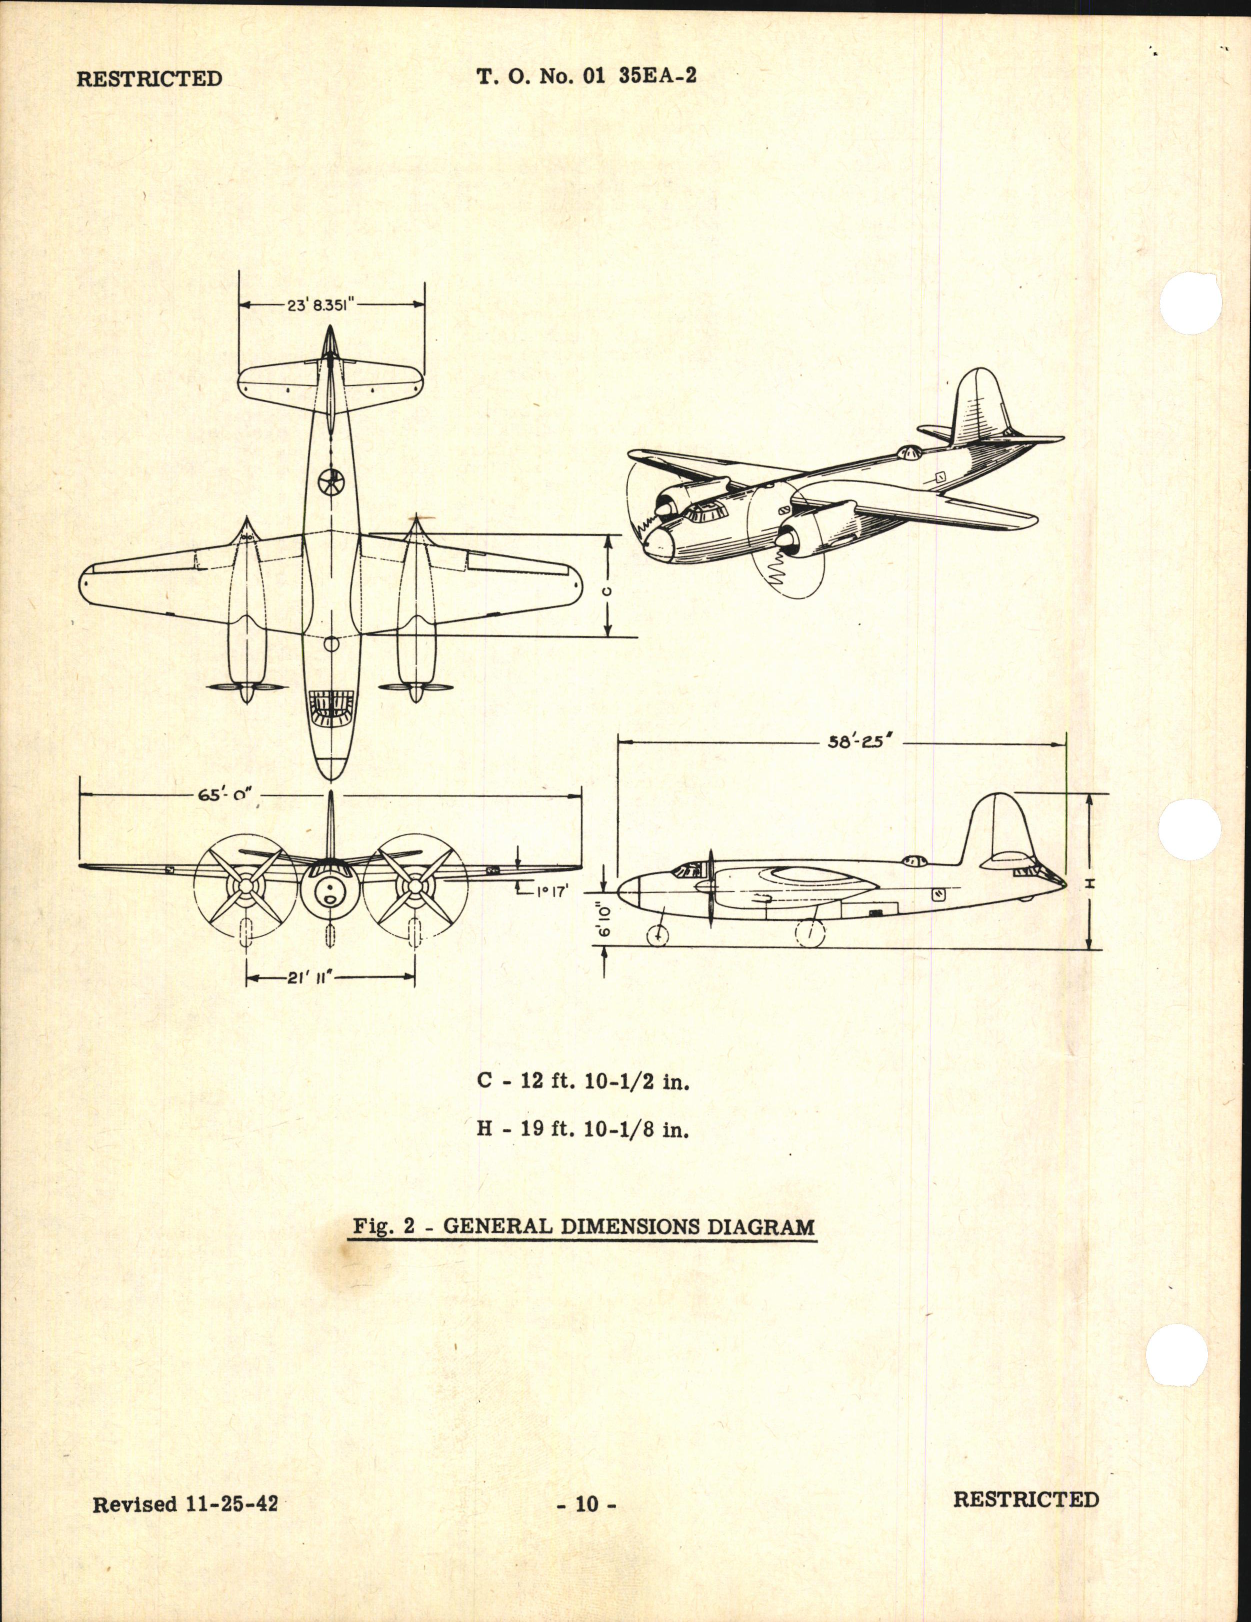 Sample page 8 from AirCorps Library document: Handbook of Service Instructions for B-26, B-26A, and B-26B Airplanes